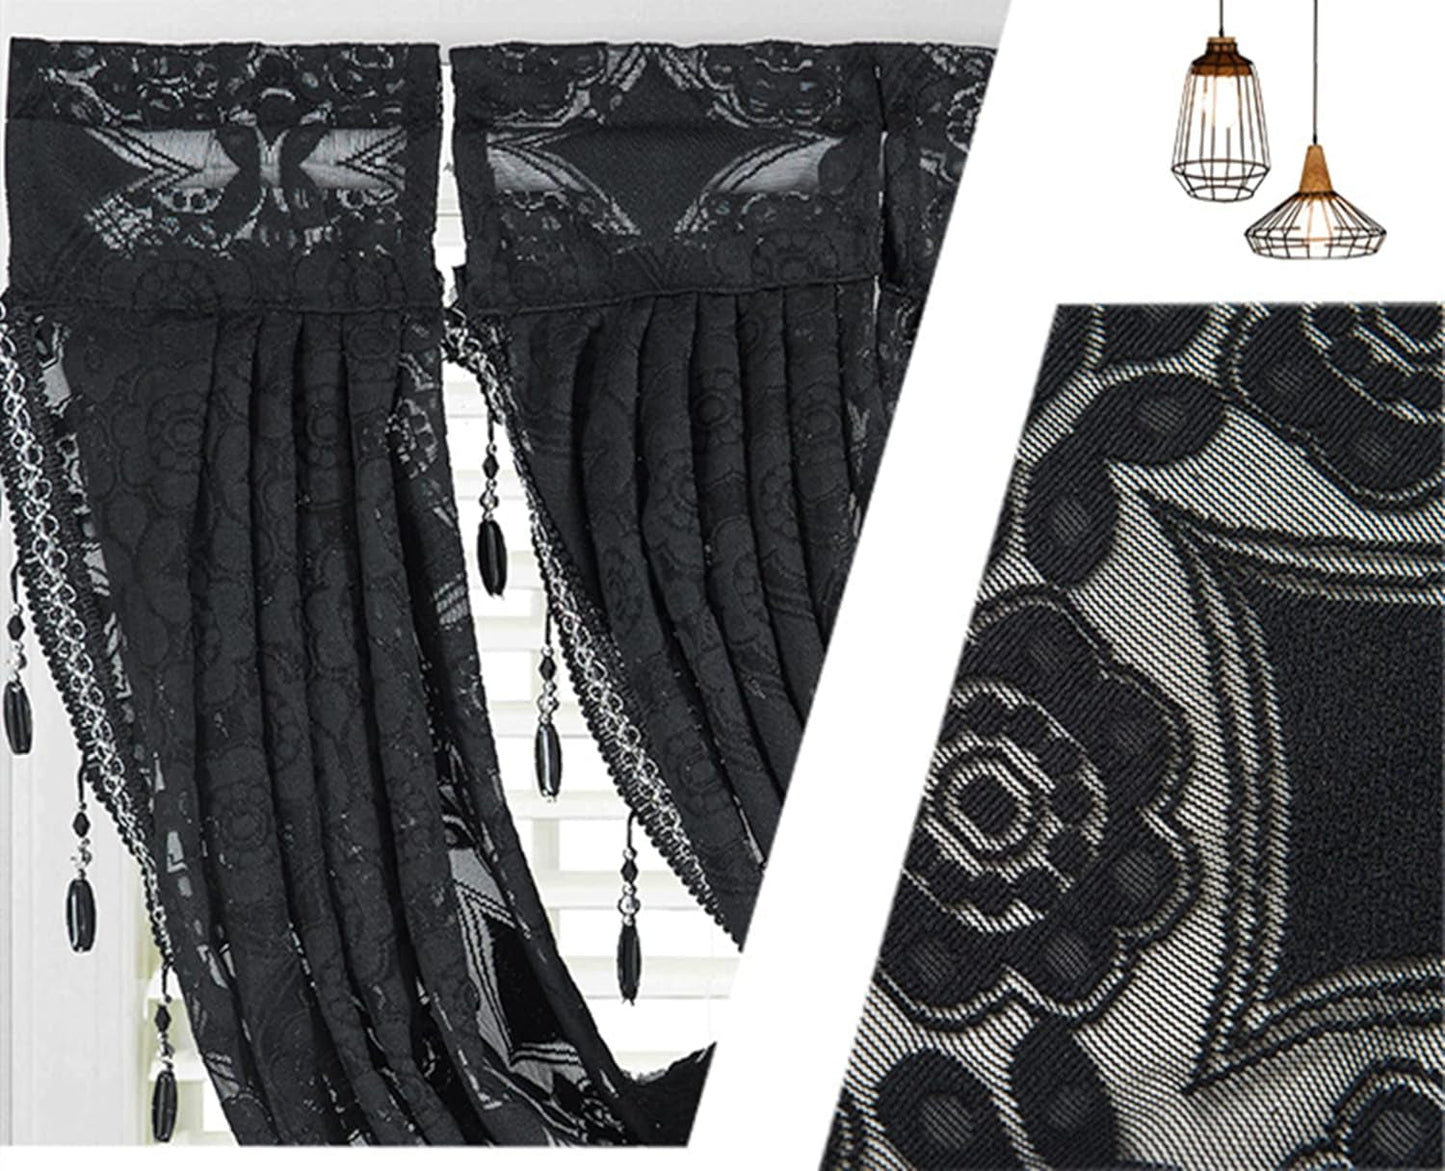 ABREEZE Waterfall Valance Sheer Curtains,Black Lace Floral Luxury Beaded Valance Sheer Window Curtain with Tassel Rod Pocket Valance Drapes,57W X 37L Inch,1 Panel